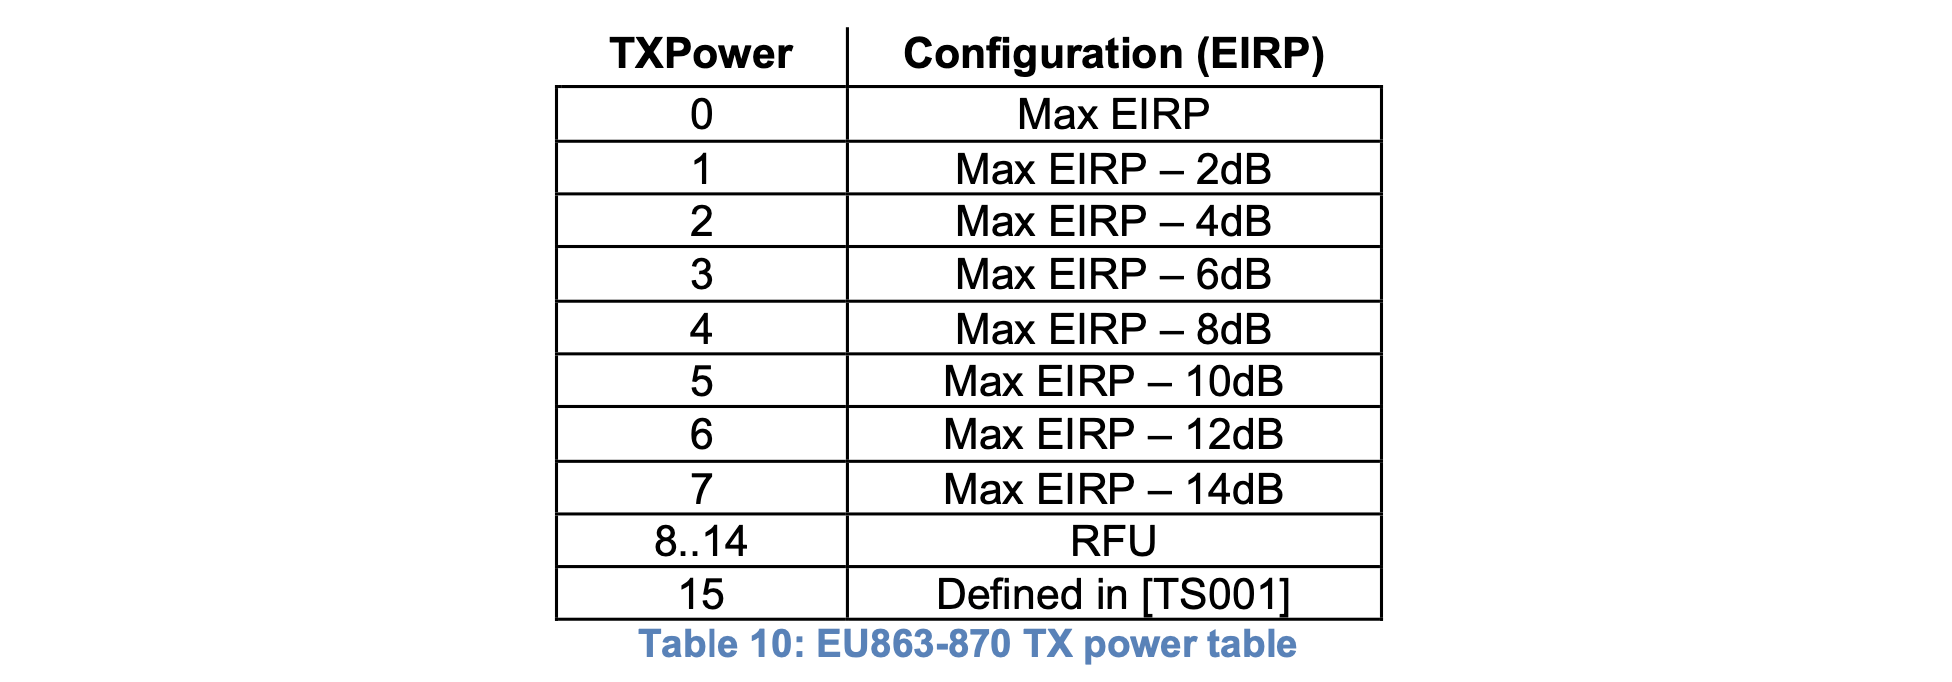 Table showing the mapping of TXPower codes to EU863 configuration. Source RP002-1.0.3 LoRaWAN Regional Parameters